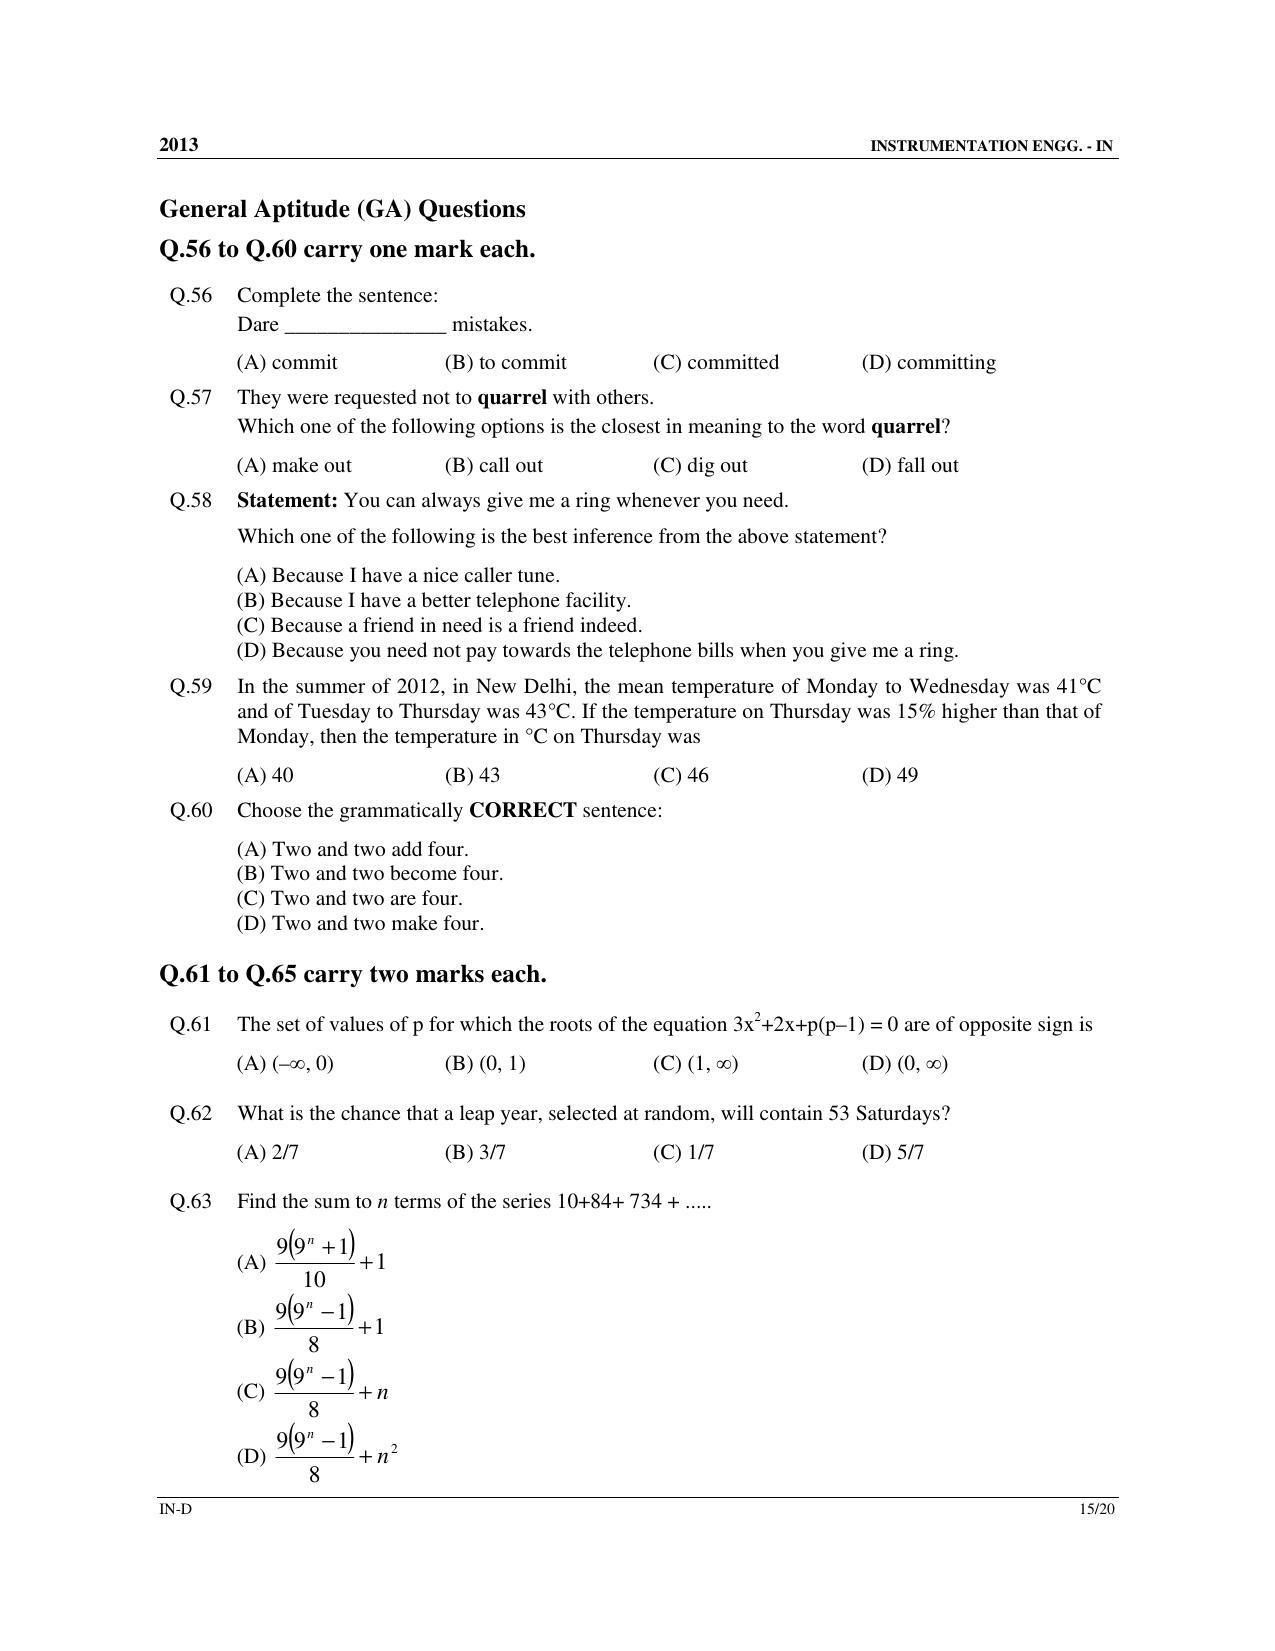 GATE 2013 Instrumentation Engineering (IN) Question Paper with Answer Key - Page 67